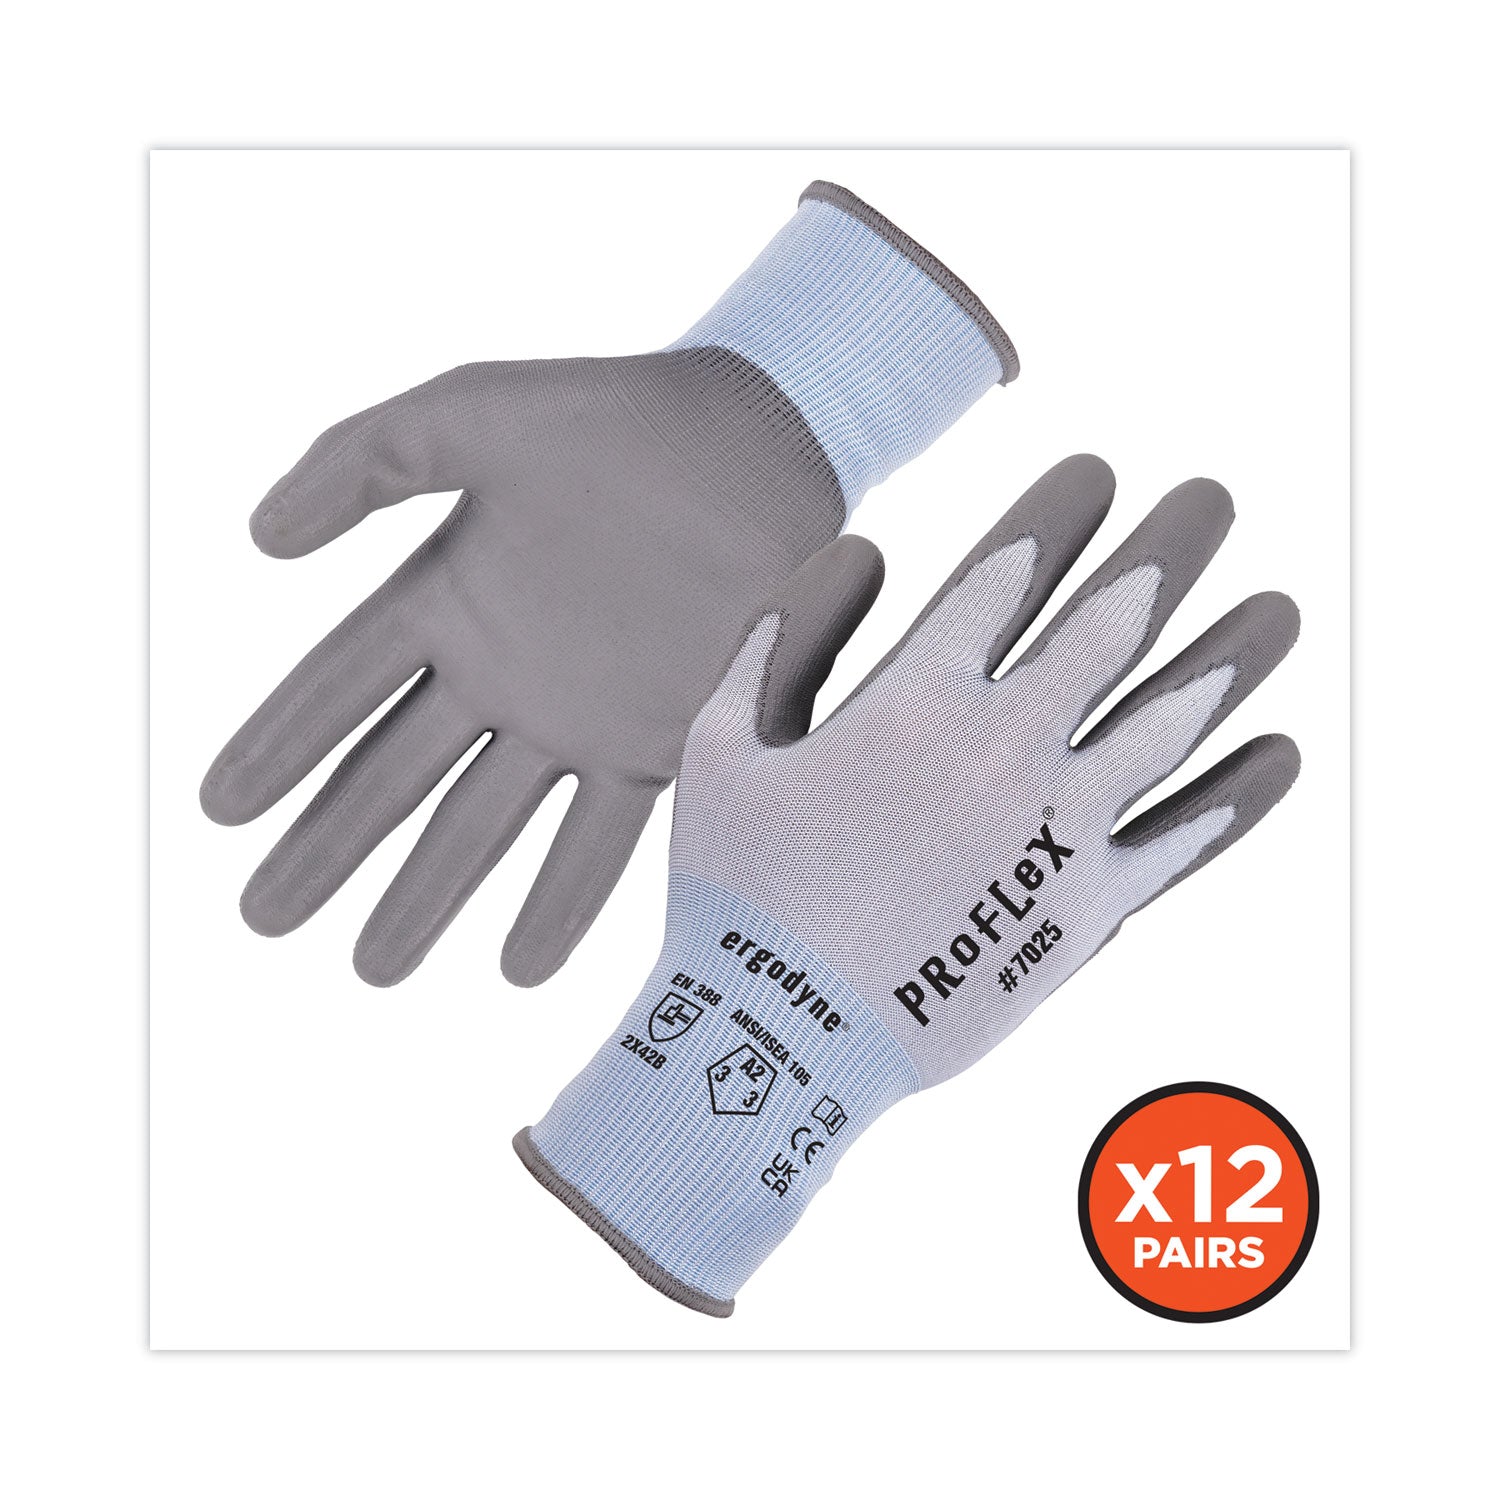 proflex-7025-ansi-a2-pu-coated-cr-gloves-blue-2x-large-12-pairs-pack-ships-in-1-3-business-days_ego10426 - 2